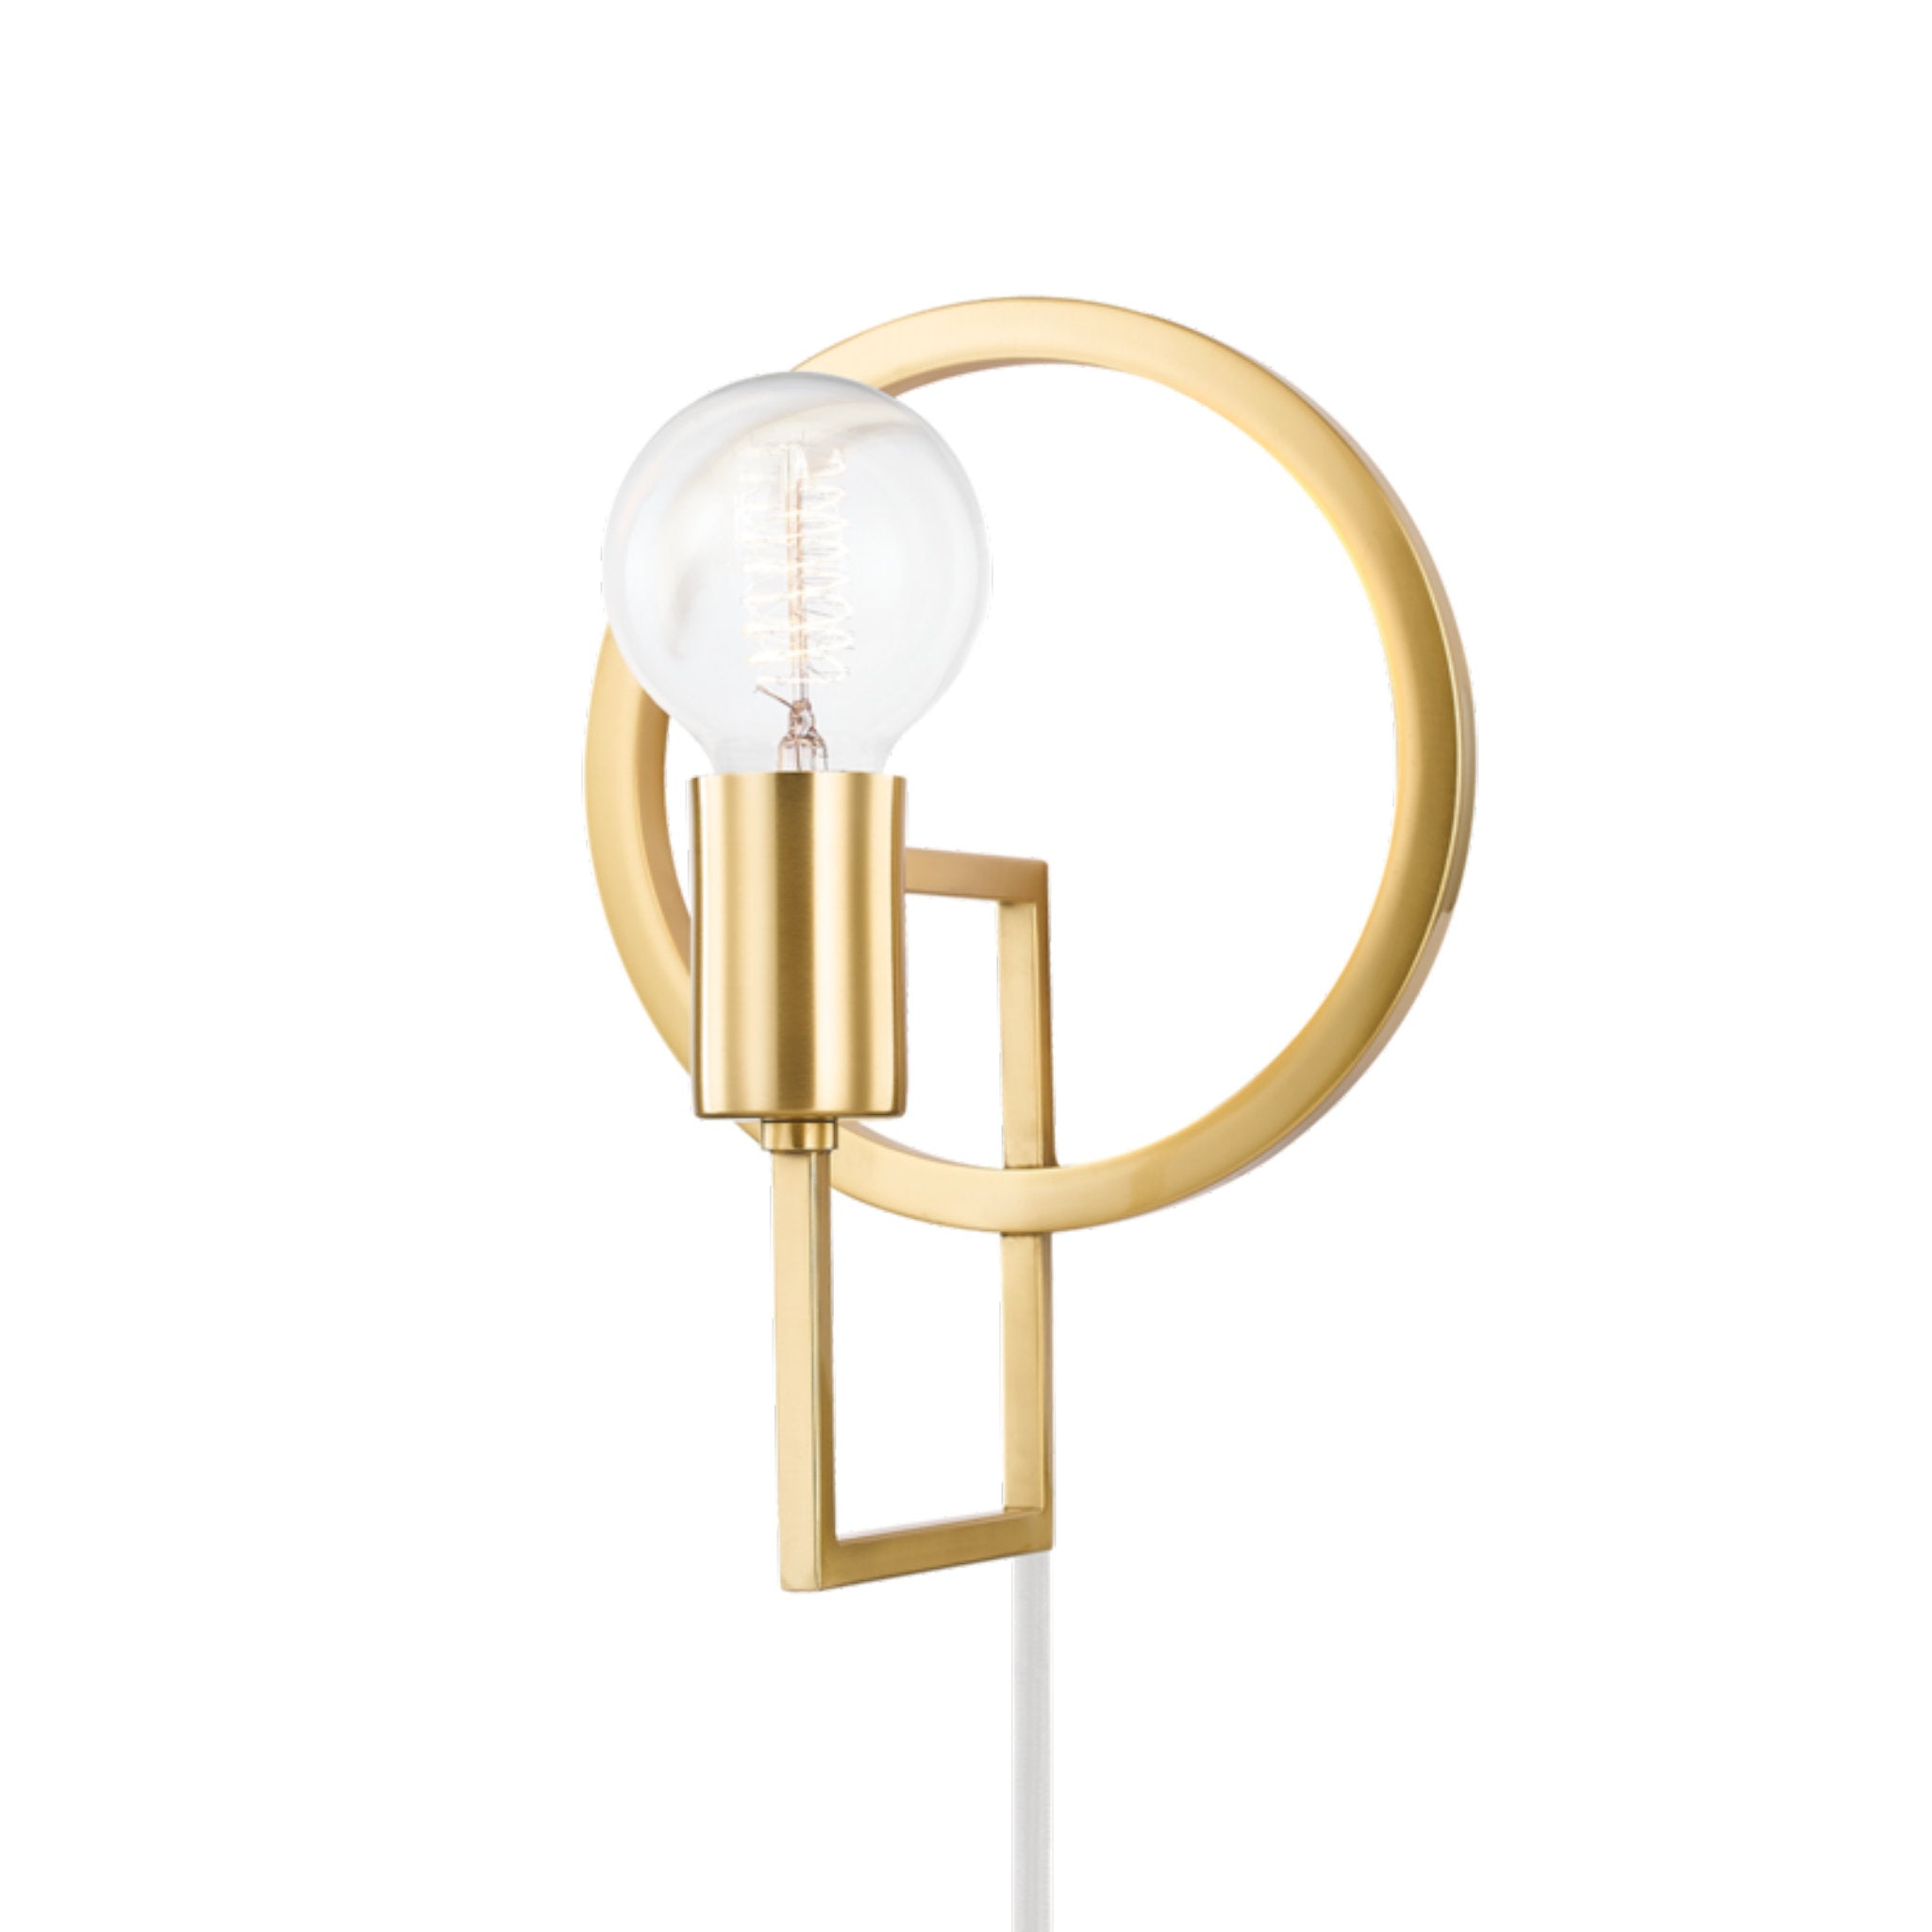 Tory 1 Light Plug-in Sconce in Aged Brass